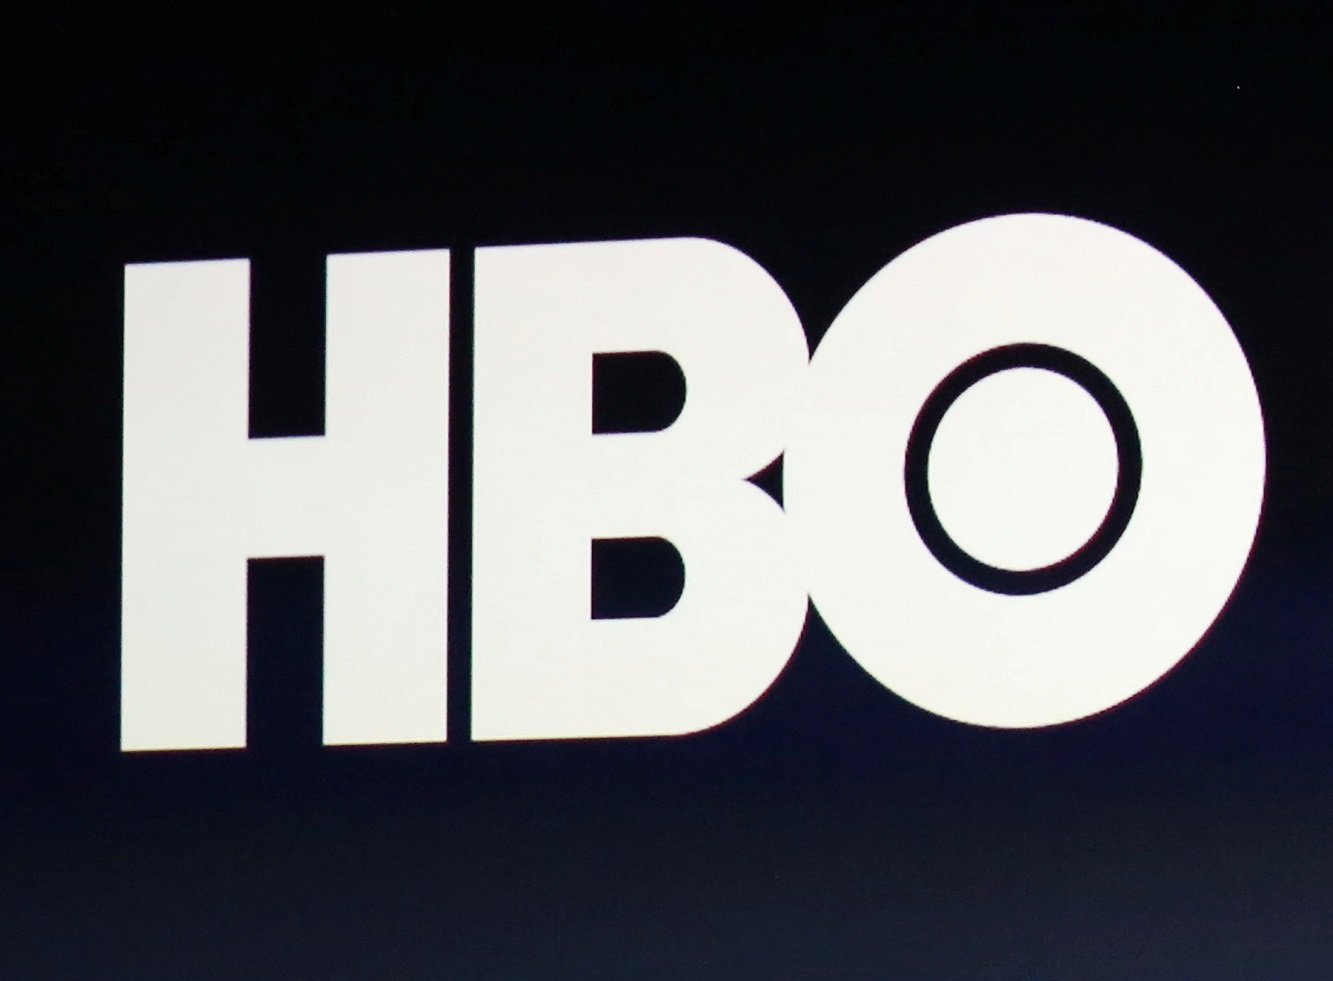 HBO Max Is Still without Amazon and Roku Deals, but Quibi Eyes Both ...